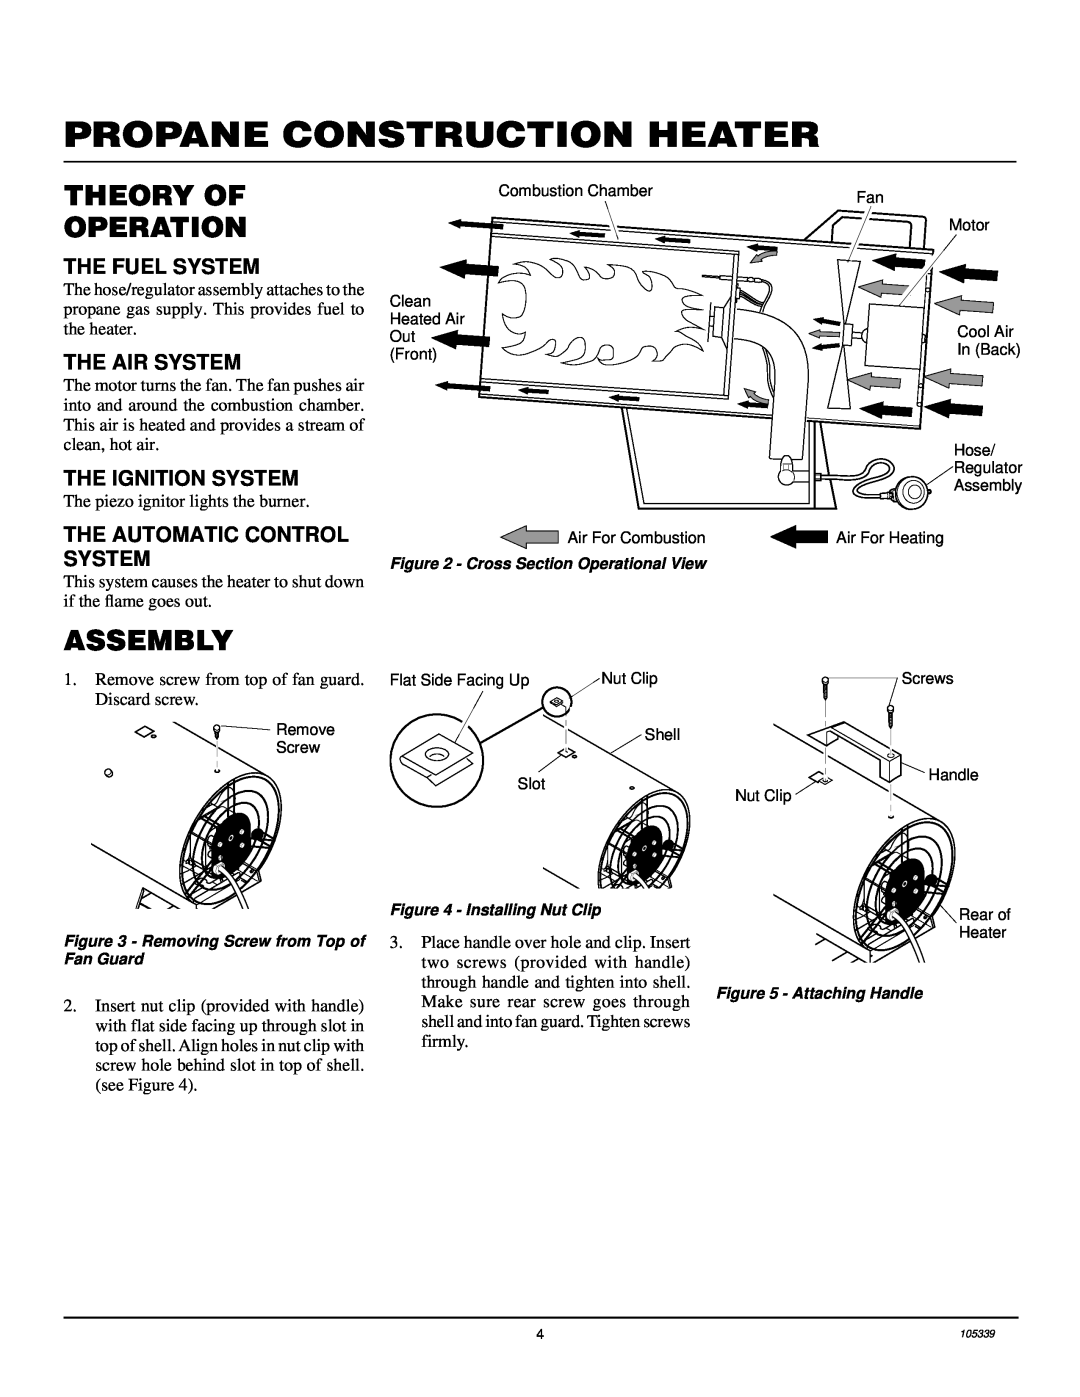 Desa RCLP50VA owner manual Theory Of Operation, Assembly, Propane Construction Heater, The Fuel System, The Air System 